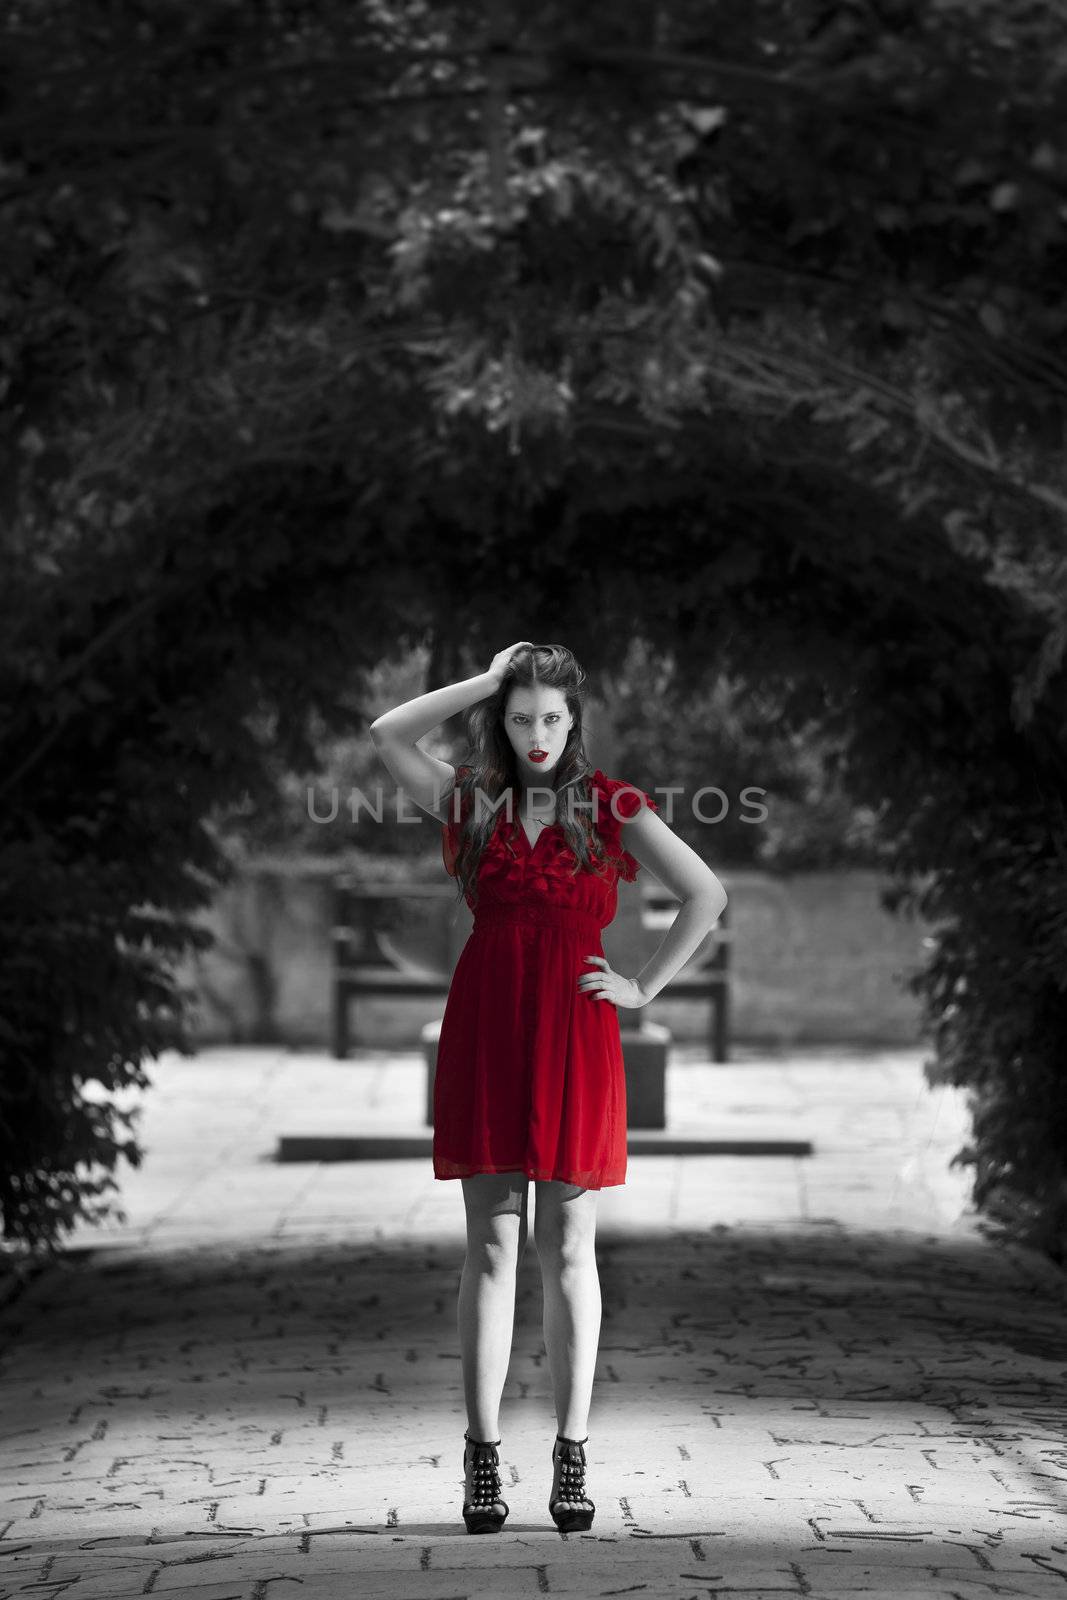 Monochrome image showing only red dress on a woman in almost intimidating stance